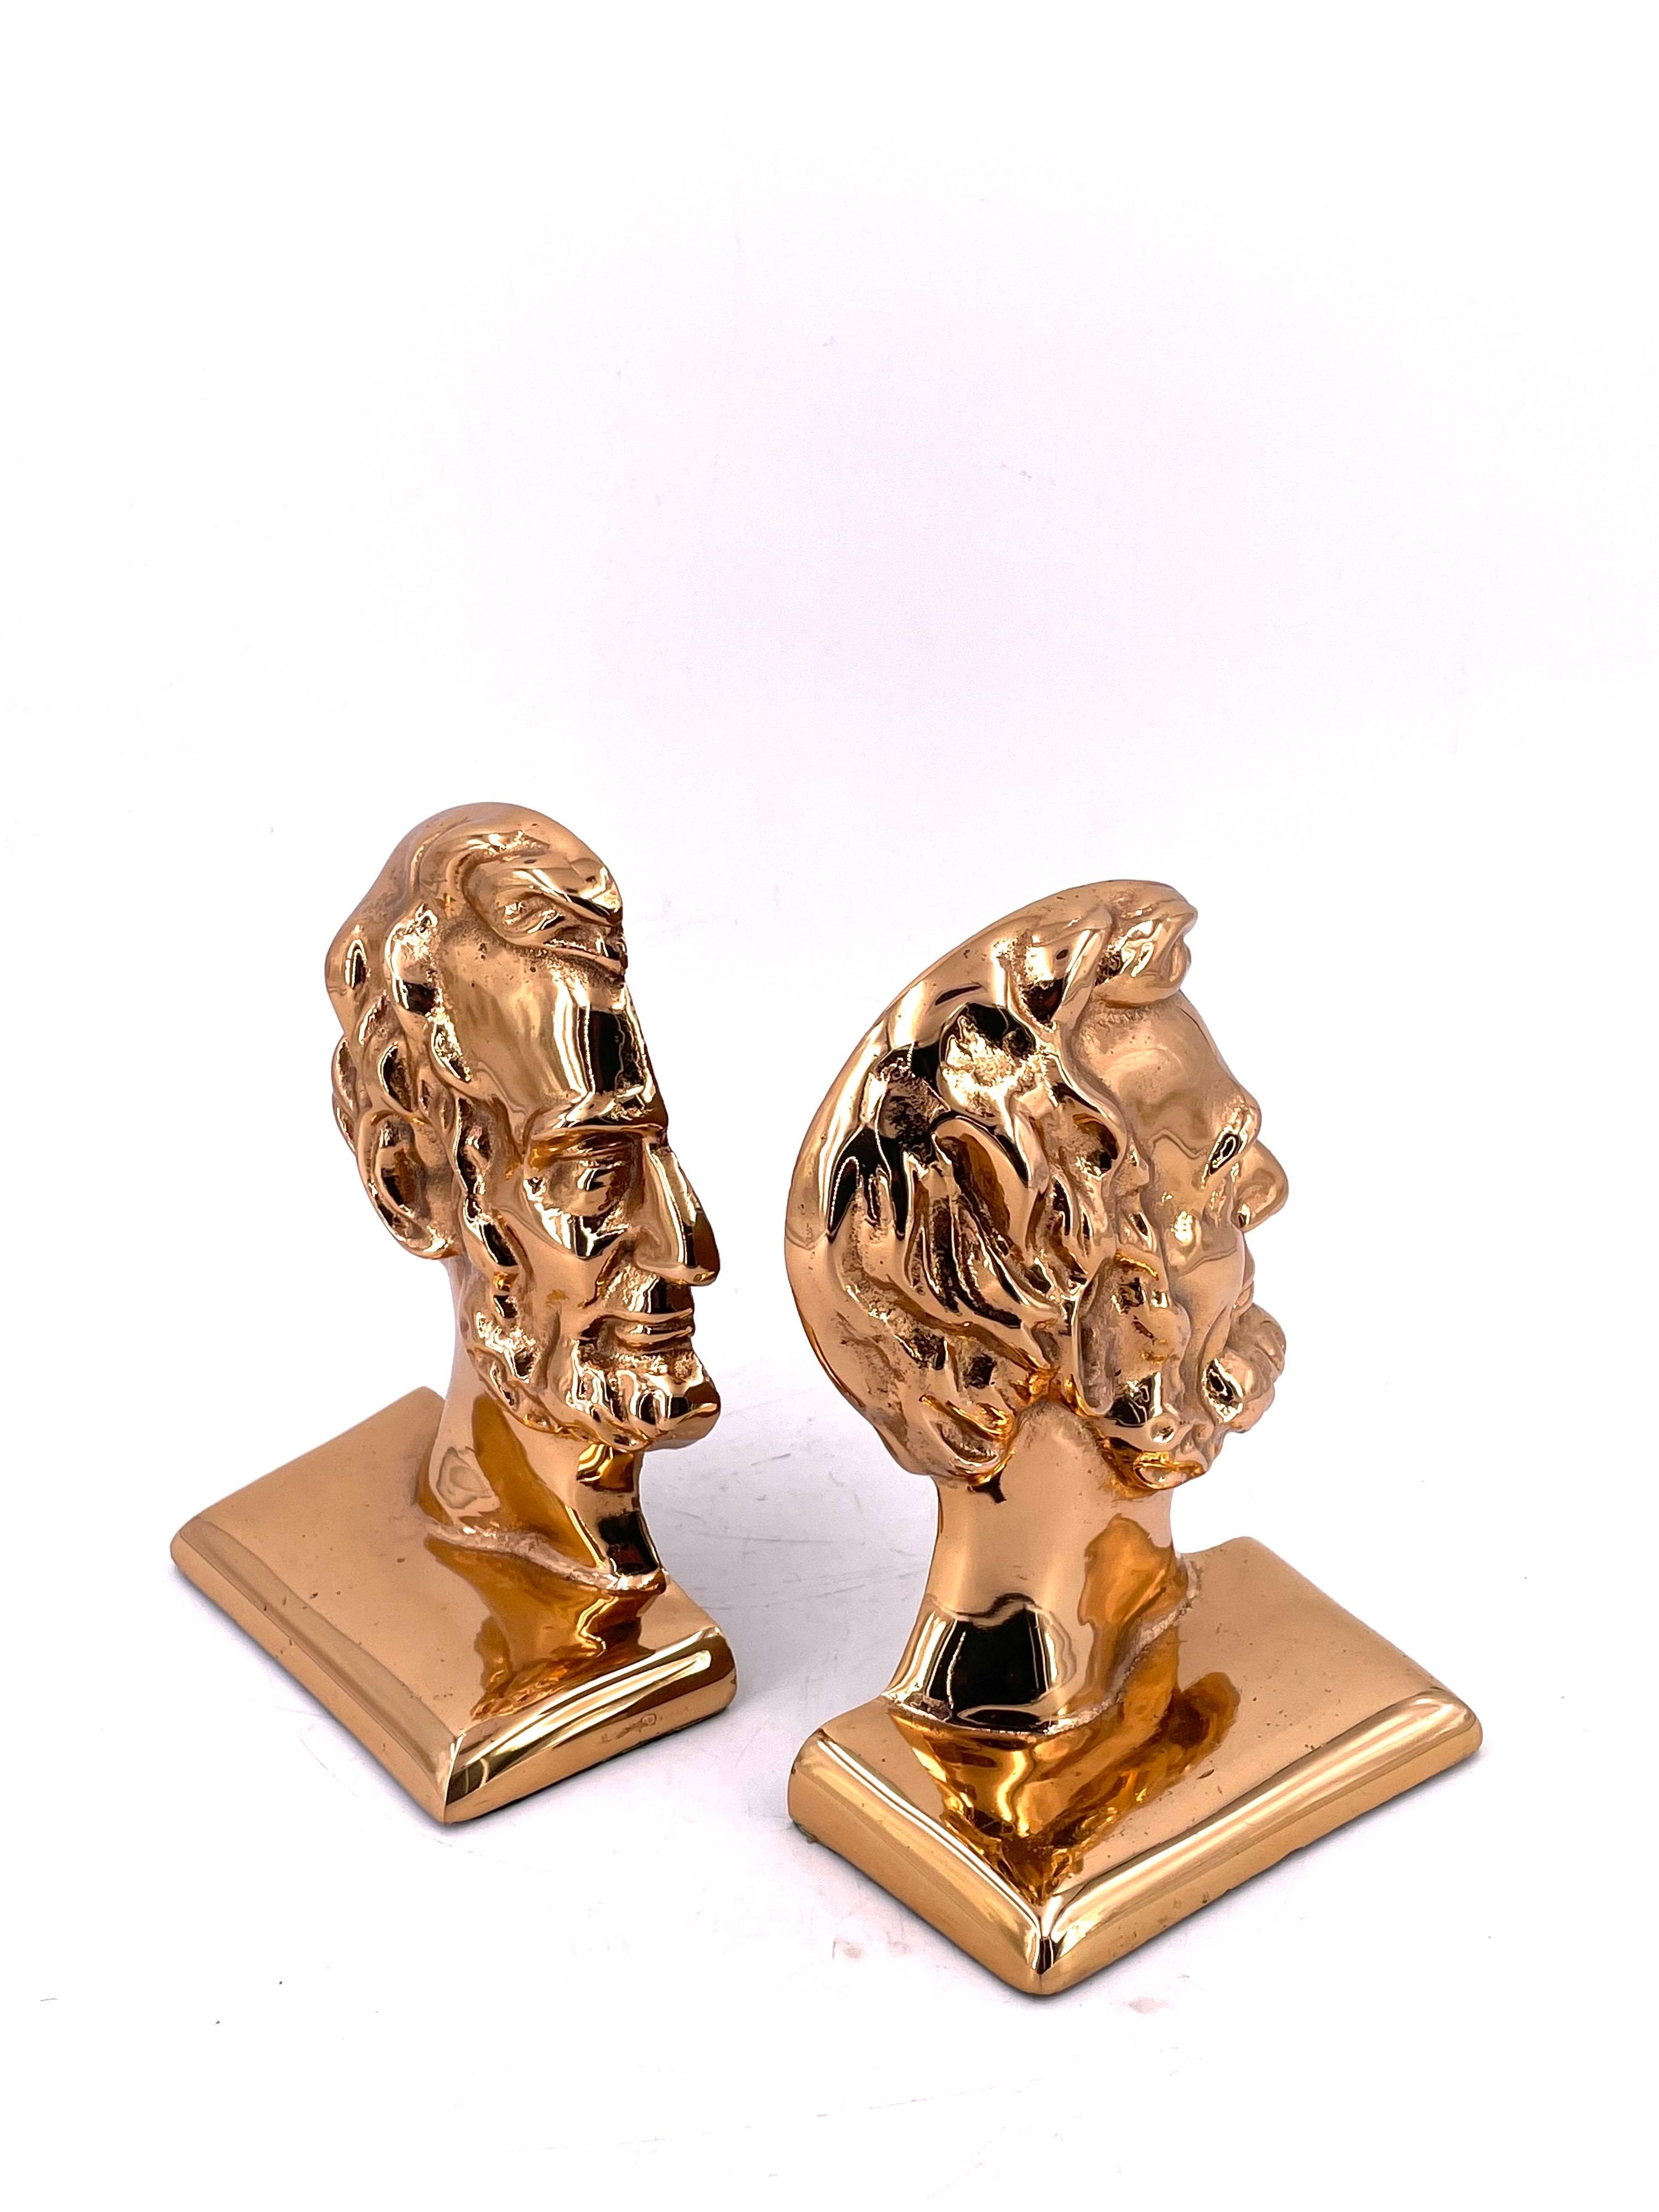 American Classical Great & Unique Rose Brass Plated Solid Cast Iron Pair of Lincoln Bookends